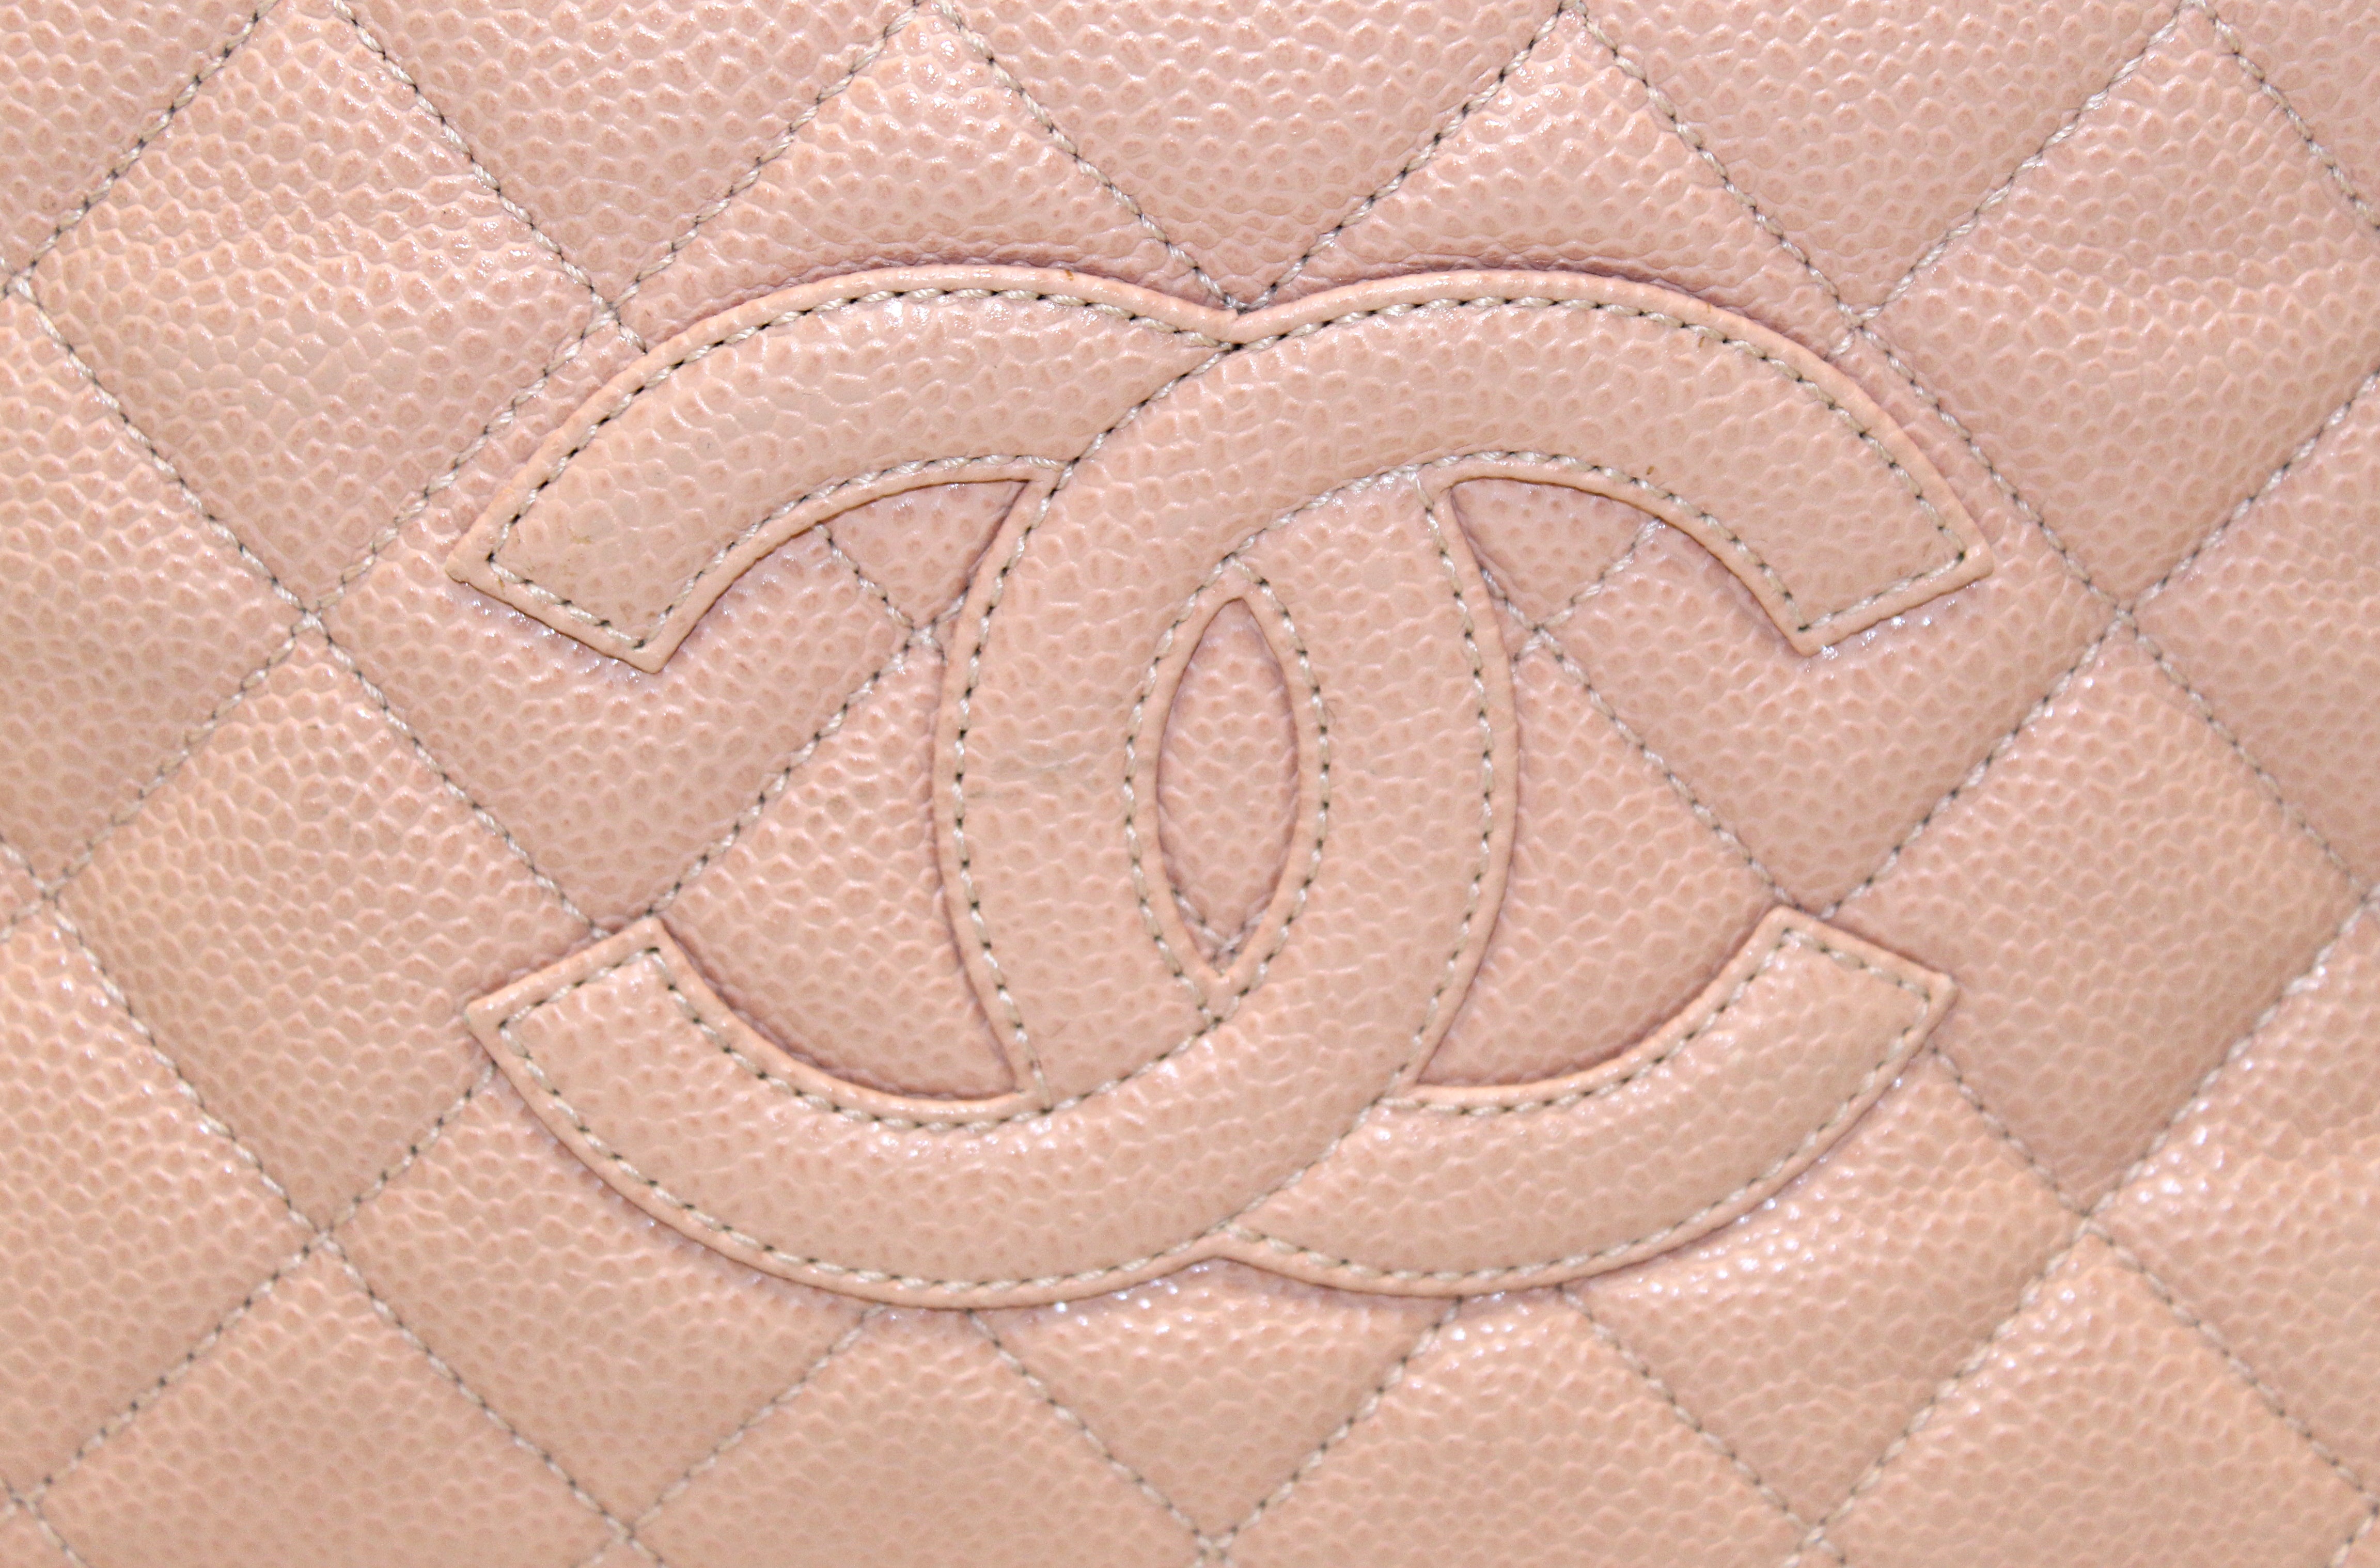 Authentic Chanel Pink Caviar Quilted Petit Timeless Tote